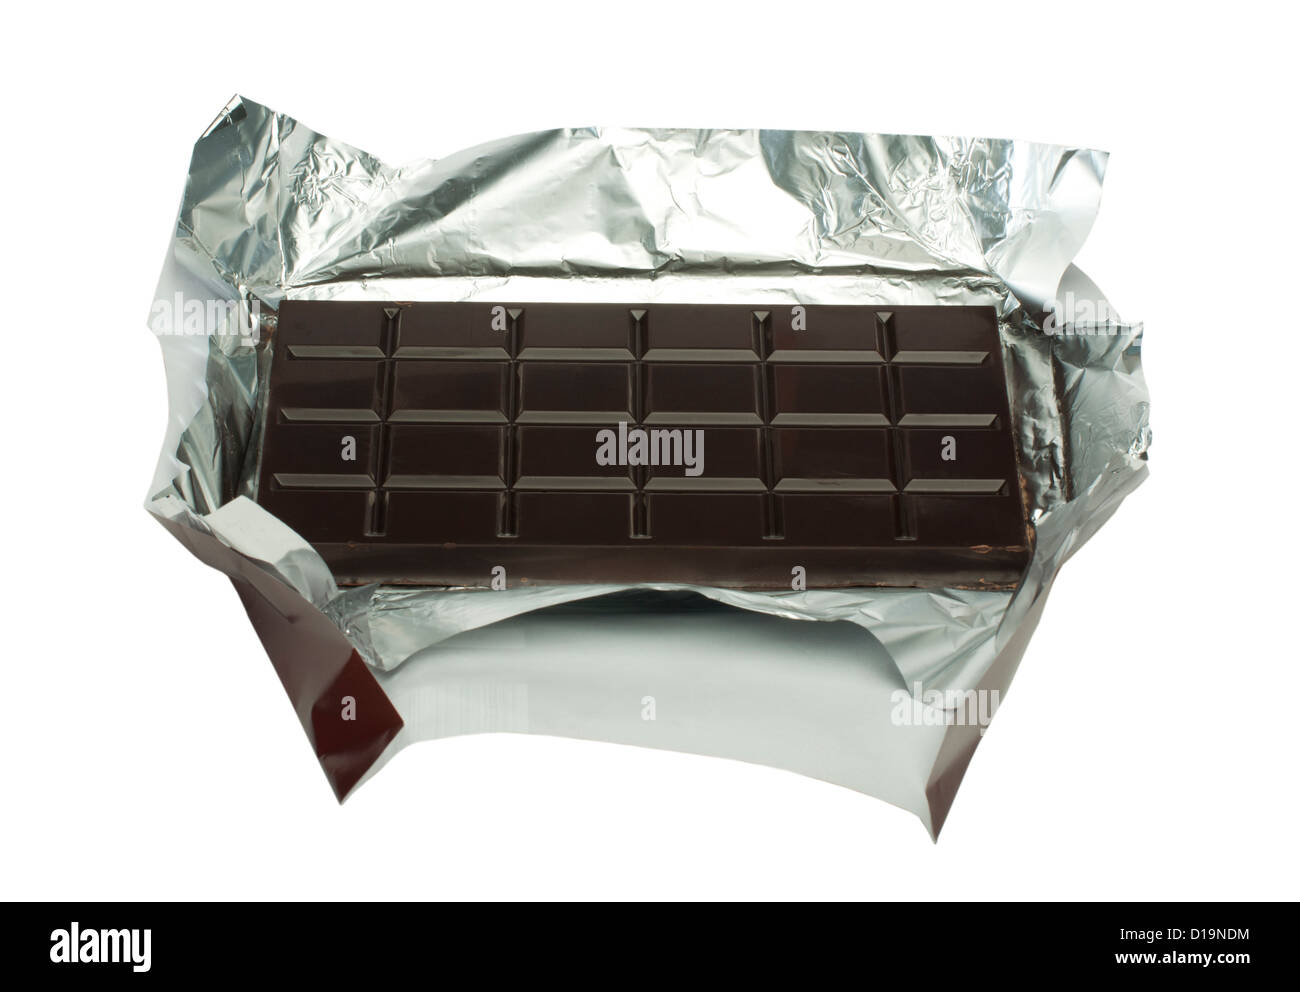 Chocolate bar in packaging of aluminum foil Stock Photo